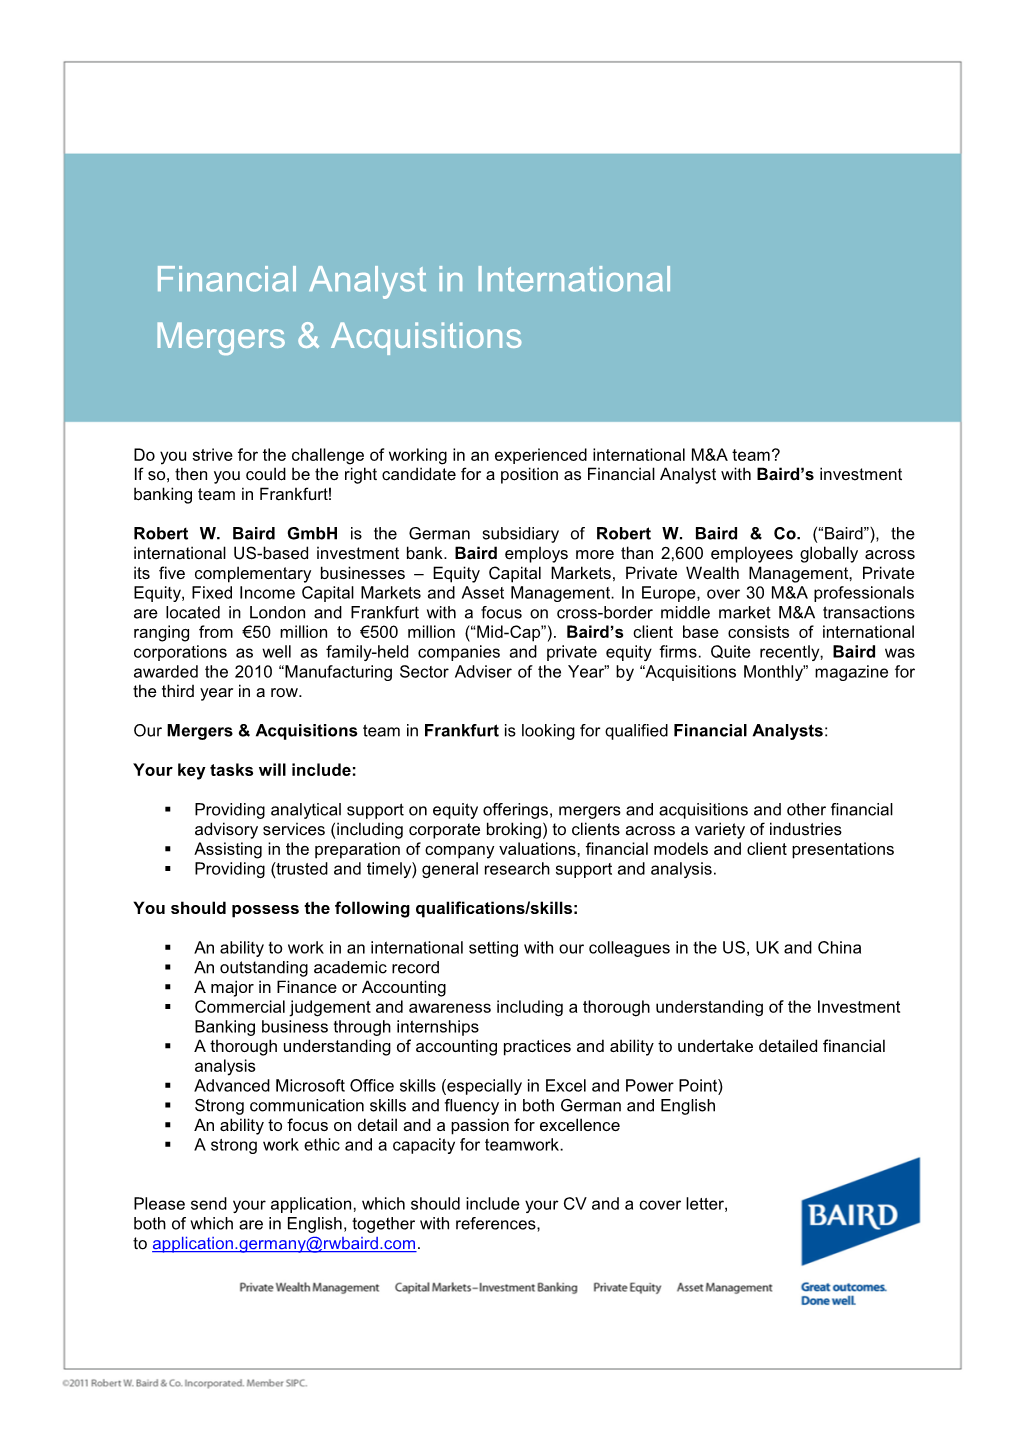 Financial Analyst in International Mergers & Acquisitions